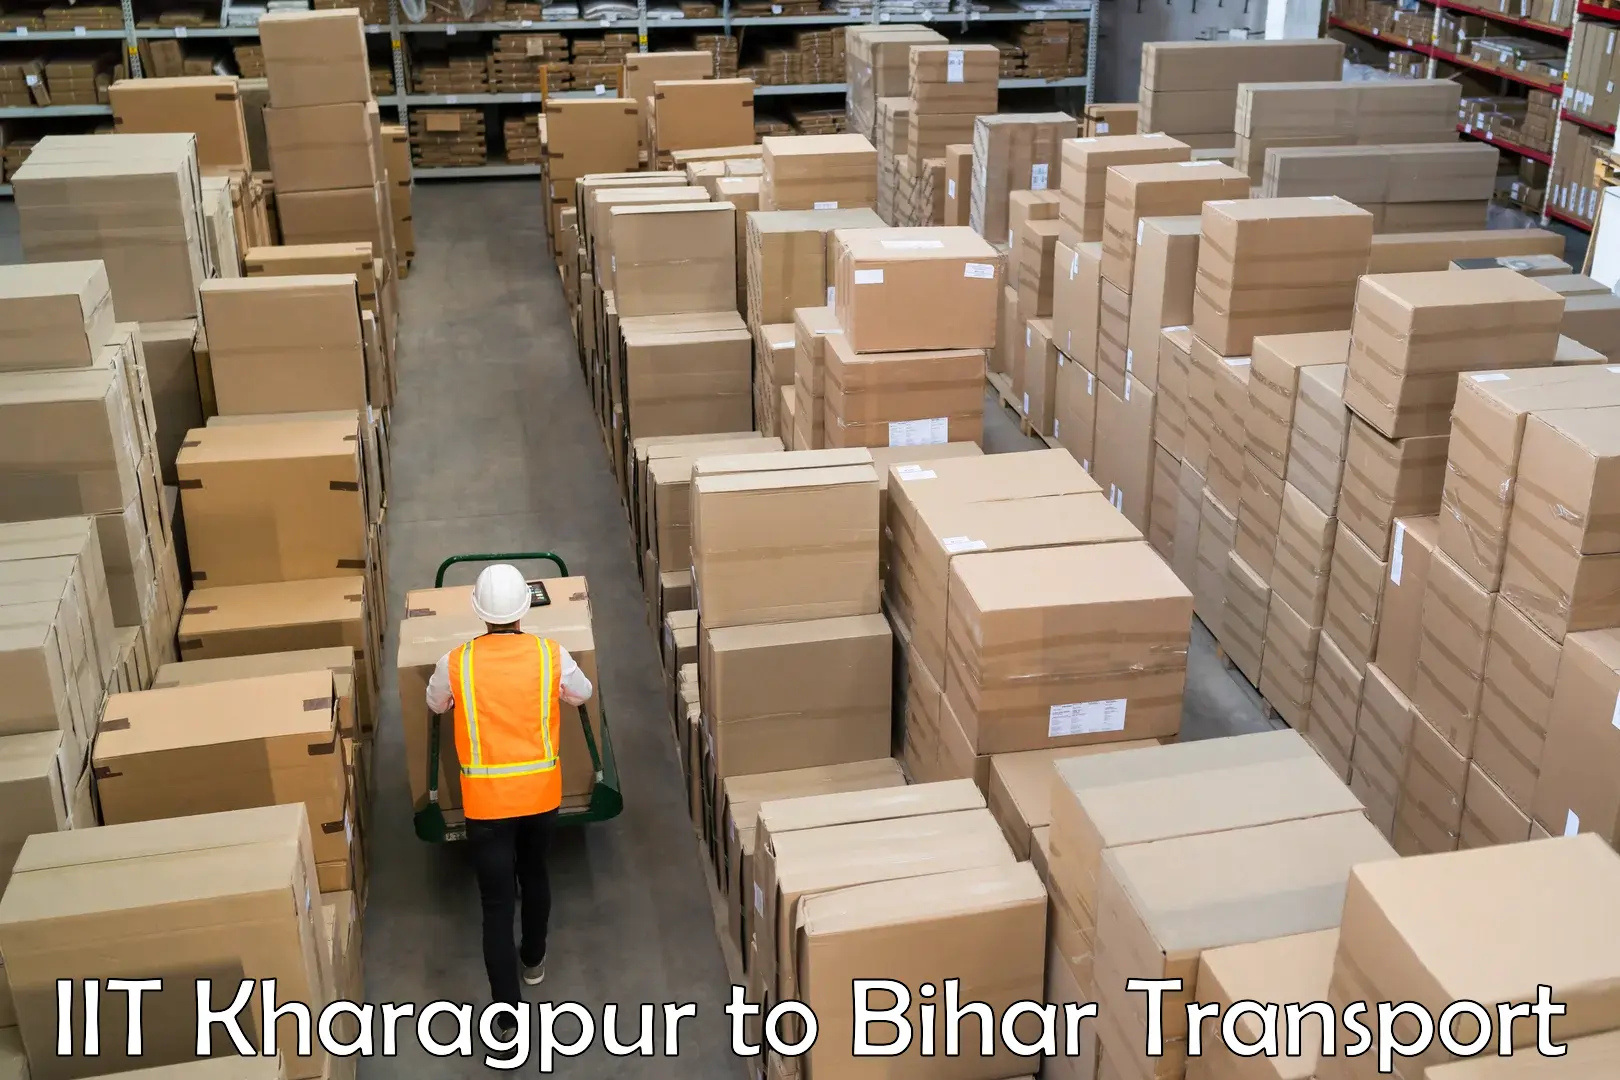 Daily parcel service transport IIT Kharagpur to Piro